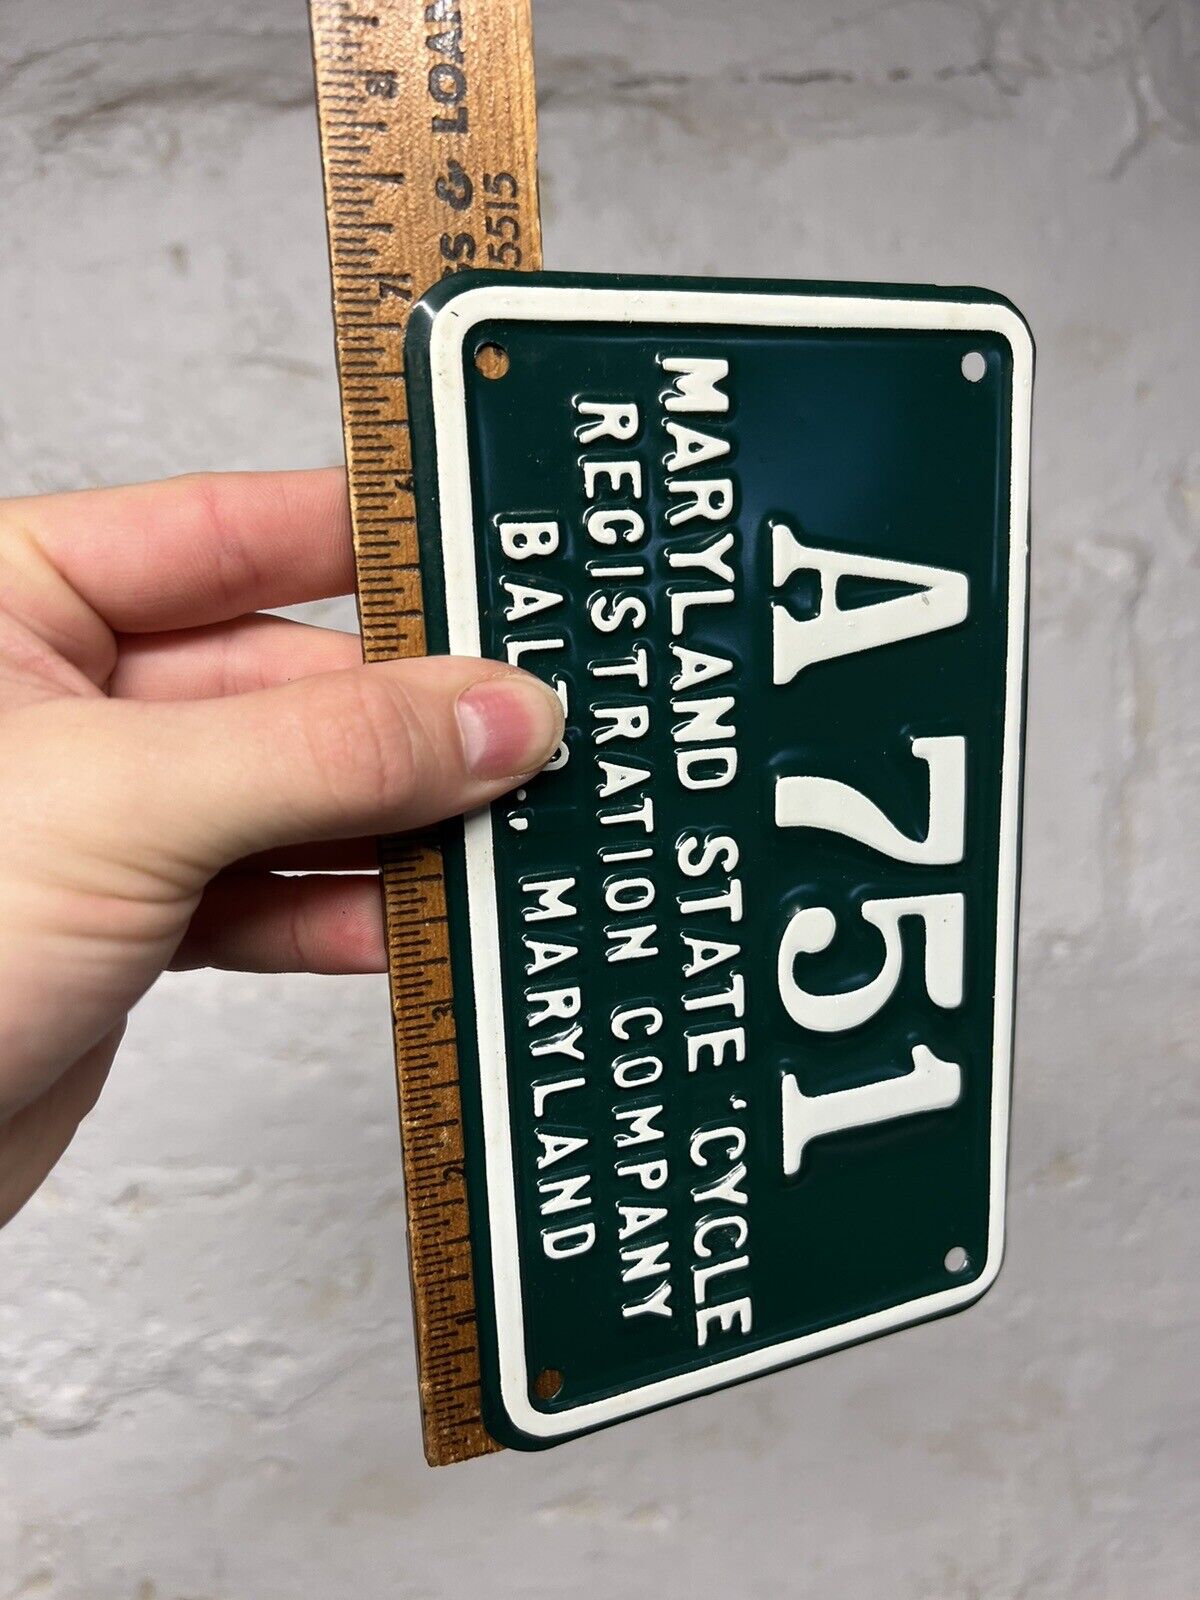 ✨ Vintage 1950s Baltimore Maryland BICYCLE License Plate Sign Gas Oil #A751 7x4✨ Без бренда - фотография #2